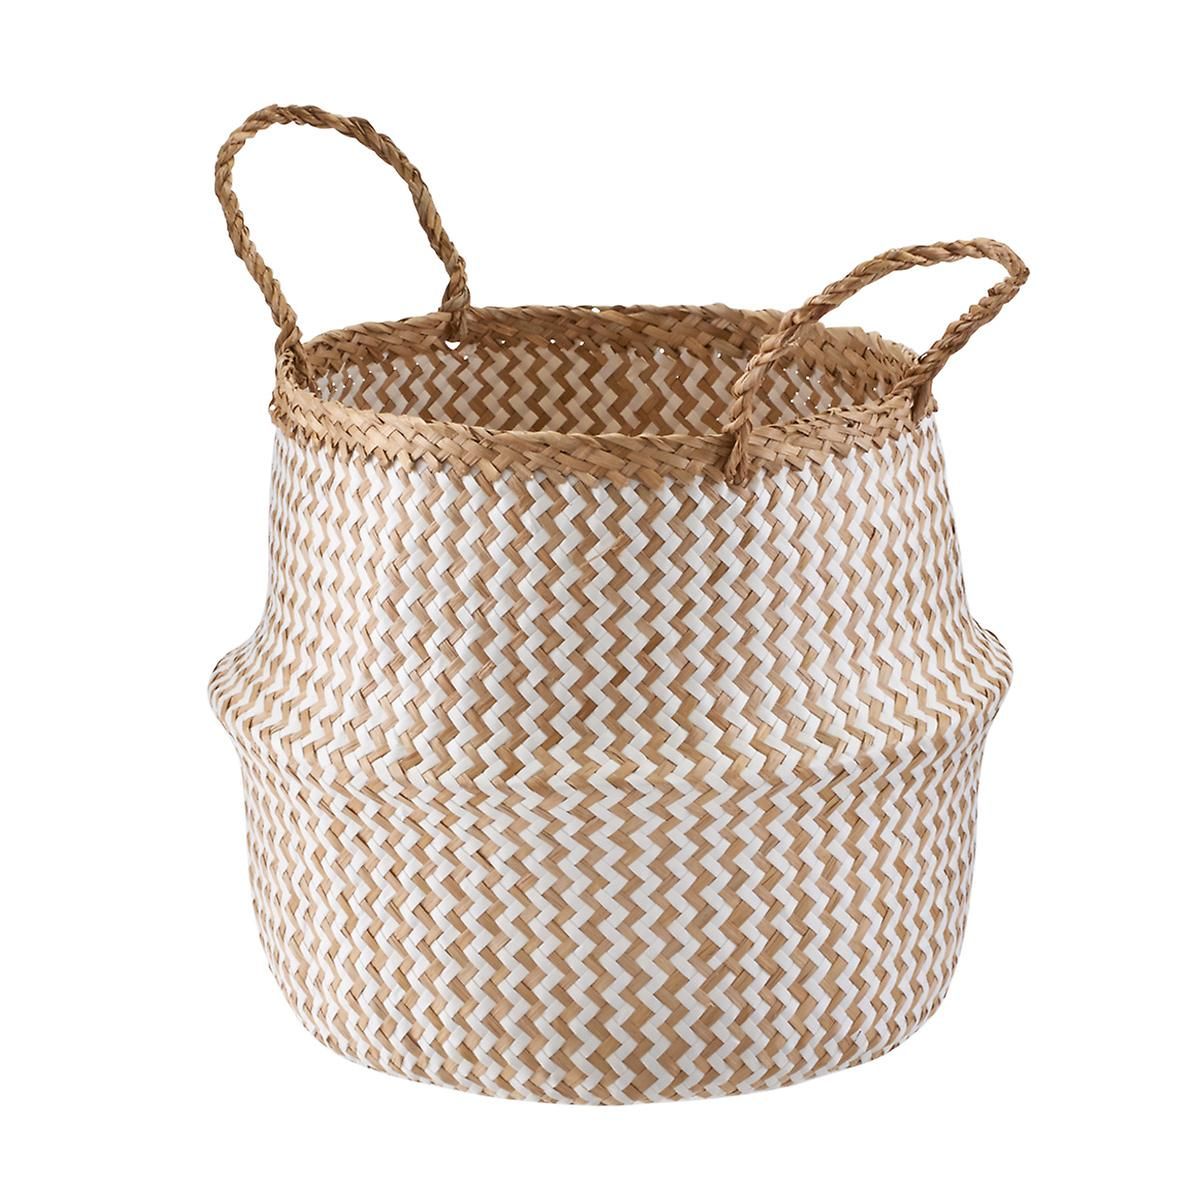 Medium Chevron Seagrass Belly Basket | The Container Store